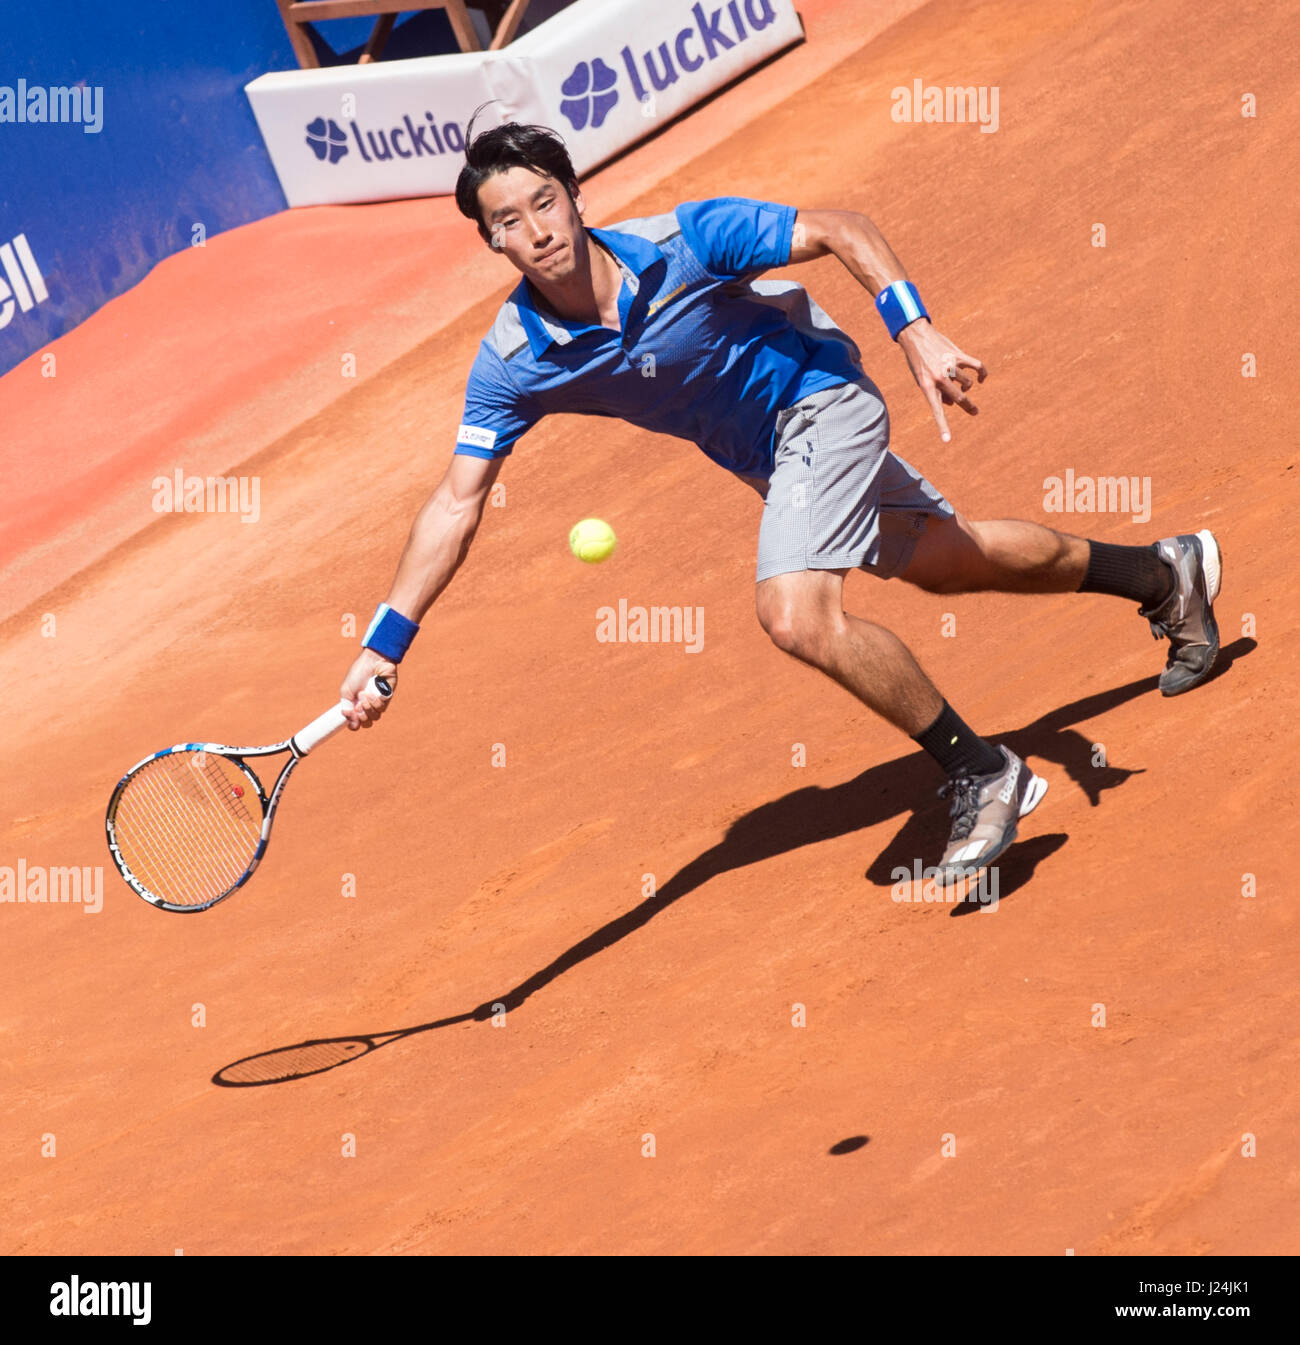 Barcelona, Spain. 25th April, 2017. Yuichi Sugita during a first round game against Tommy Robredo at 'Barcelona Open Banc Sabadell - Trofeo Conde de Godó'. Credit: David Grau/Alamy Live News. Stock Photo